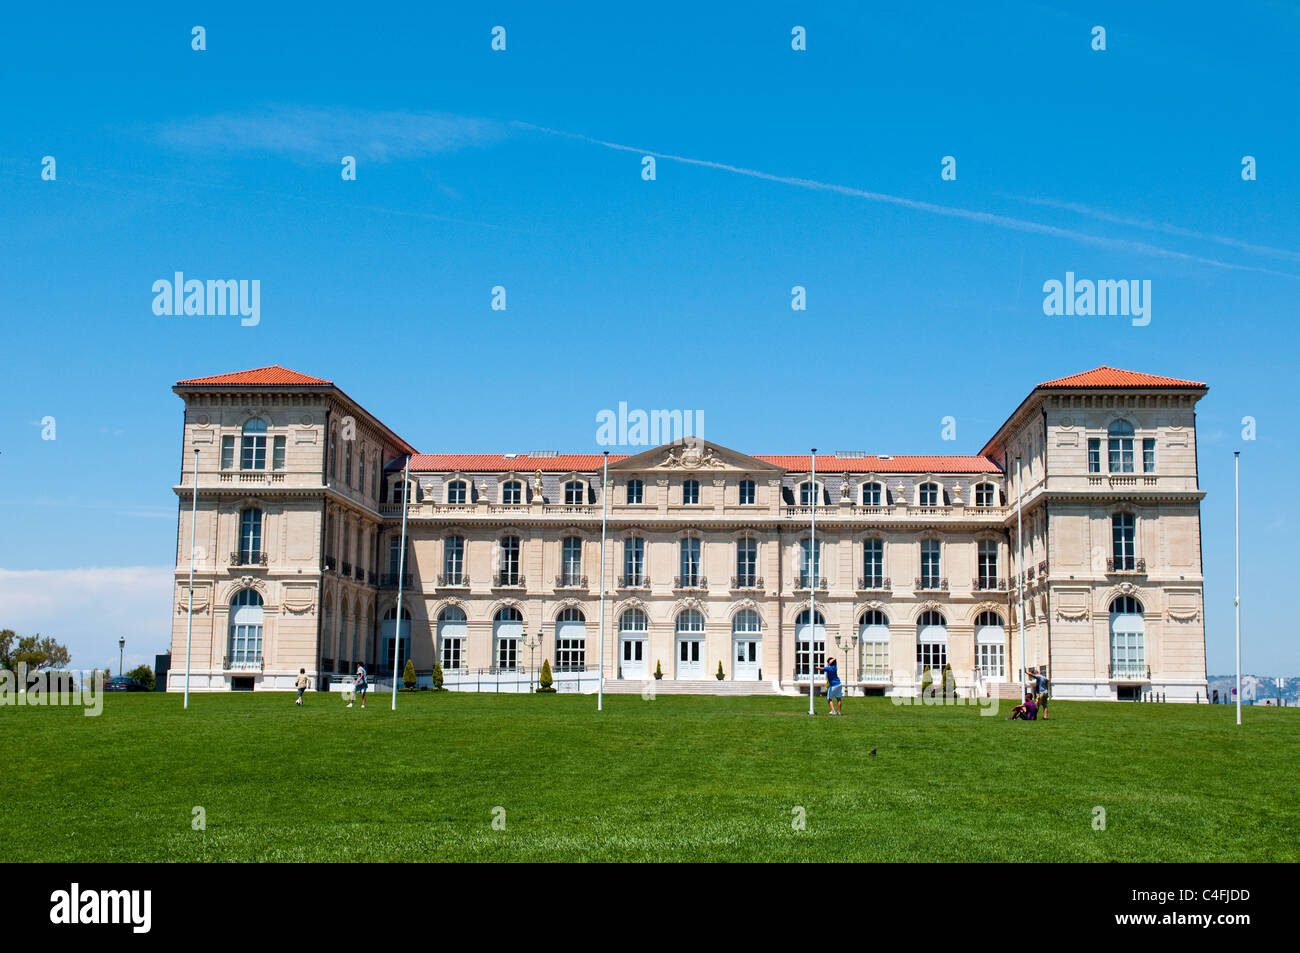 Peoples play football in front of palace Pharo. Marseille, France Stock Photo